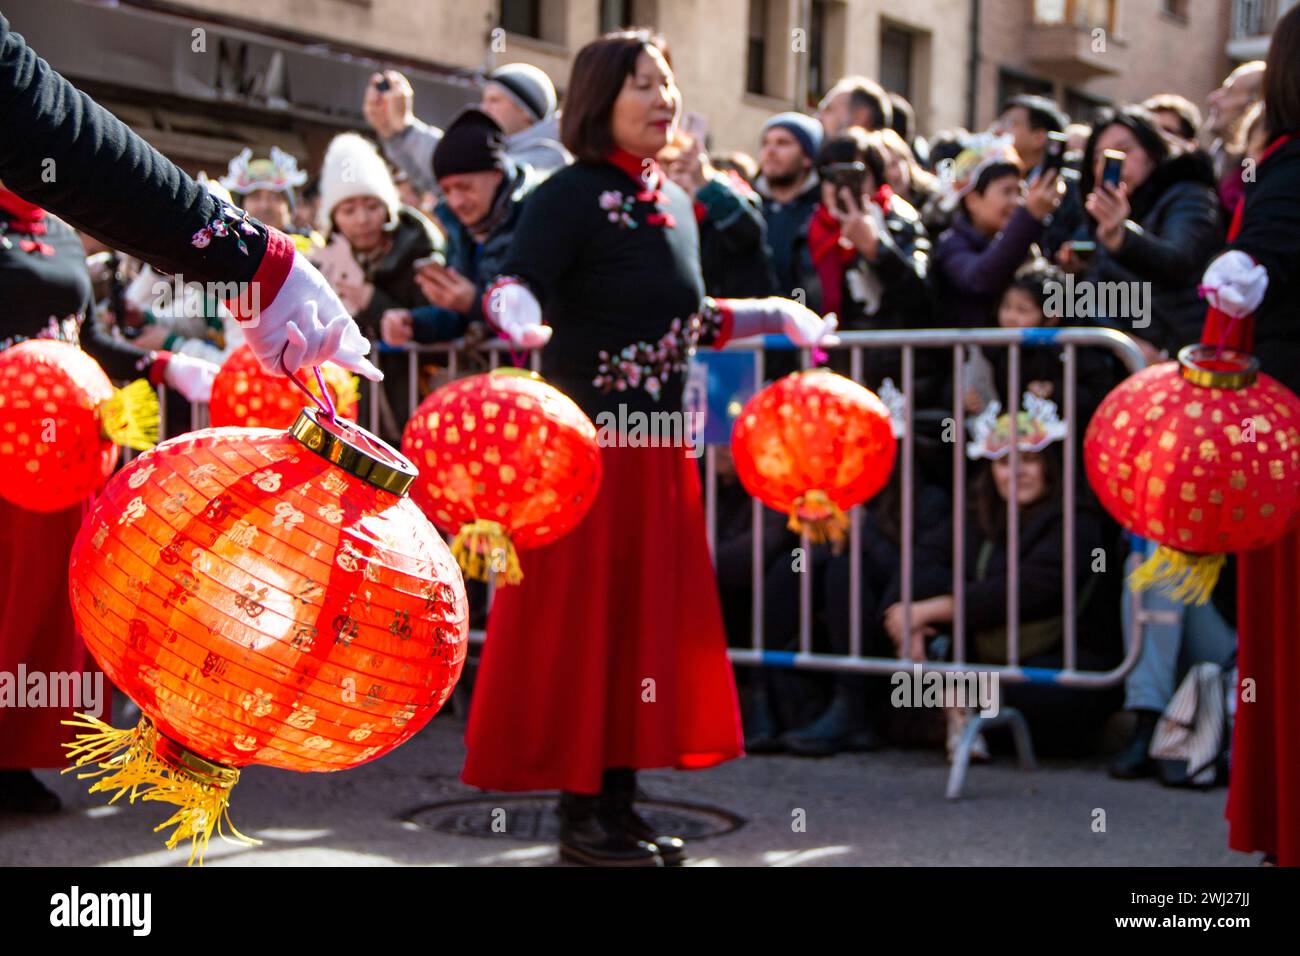 Chinese New Year Wooden Dragon Parade. In this case we can see the dance with red balloons carried by Chinese women Stock Photo